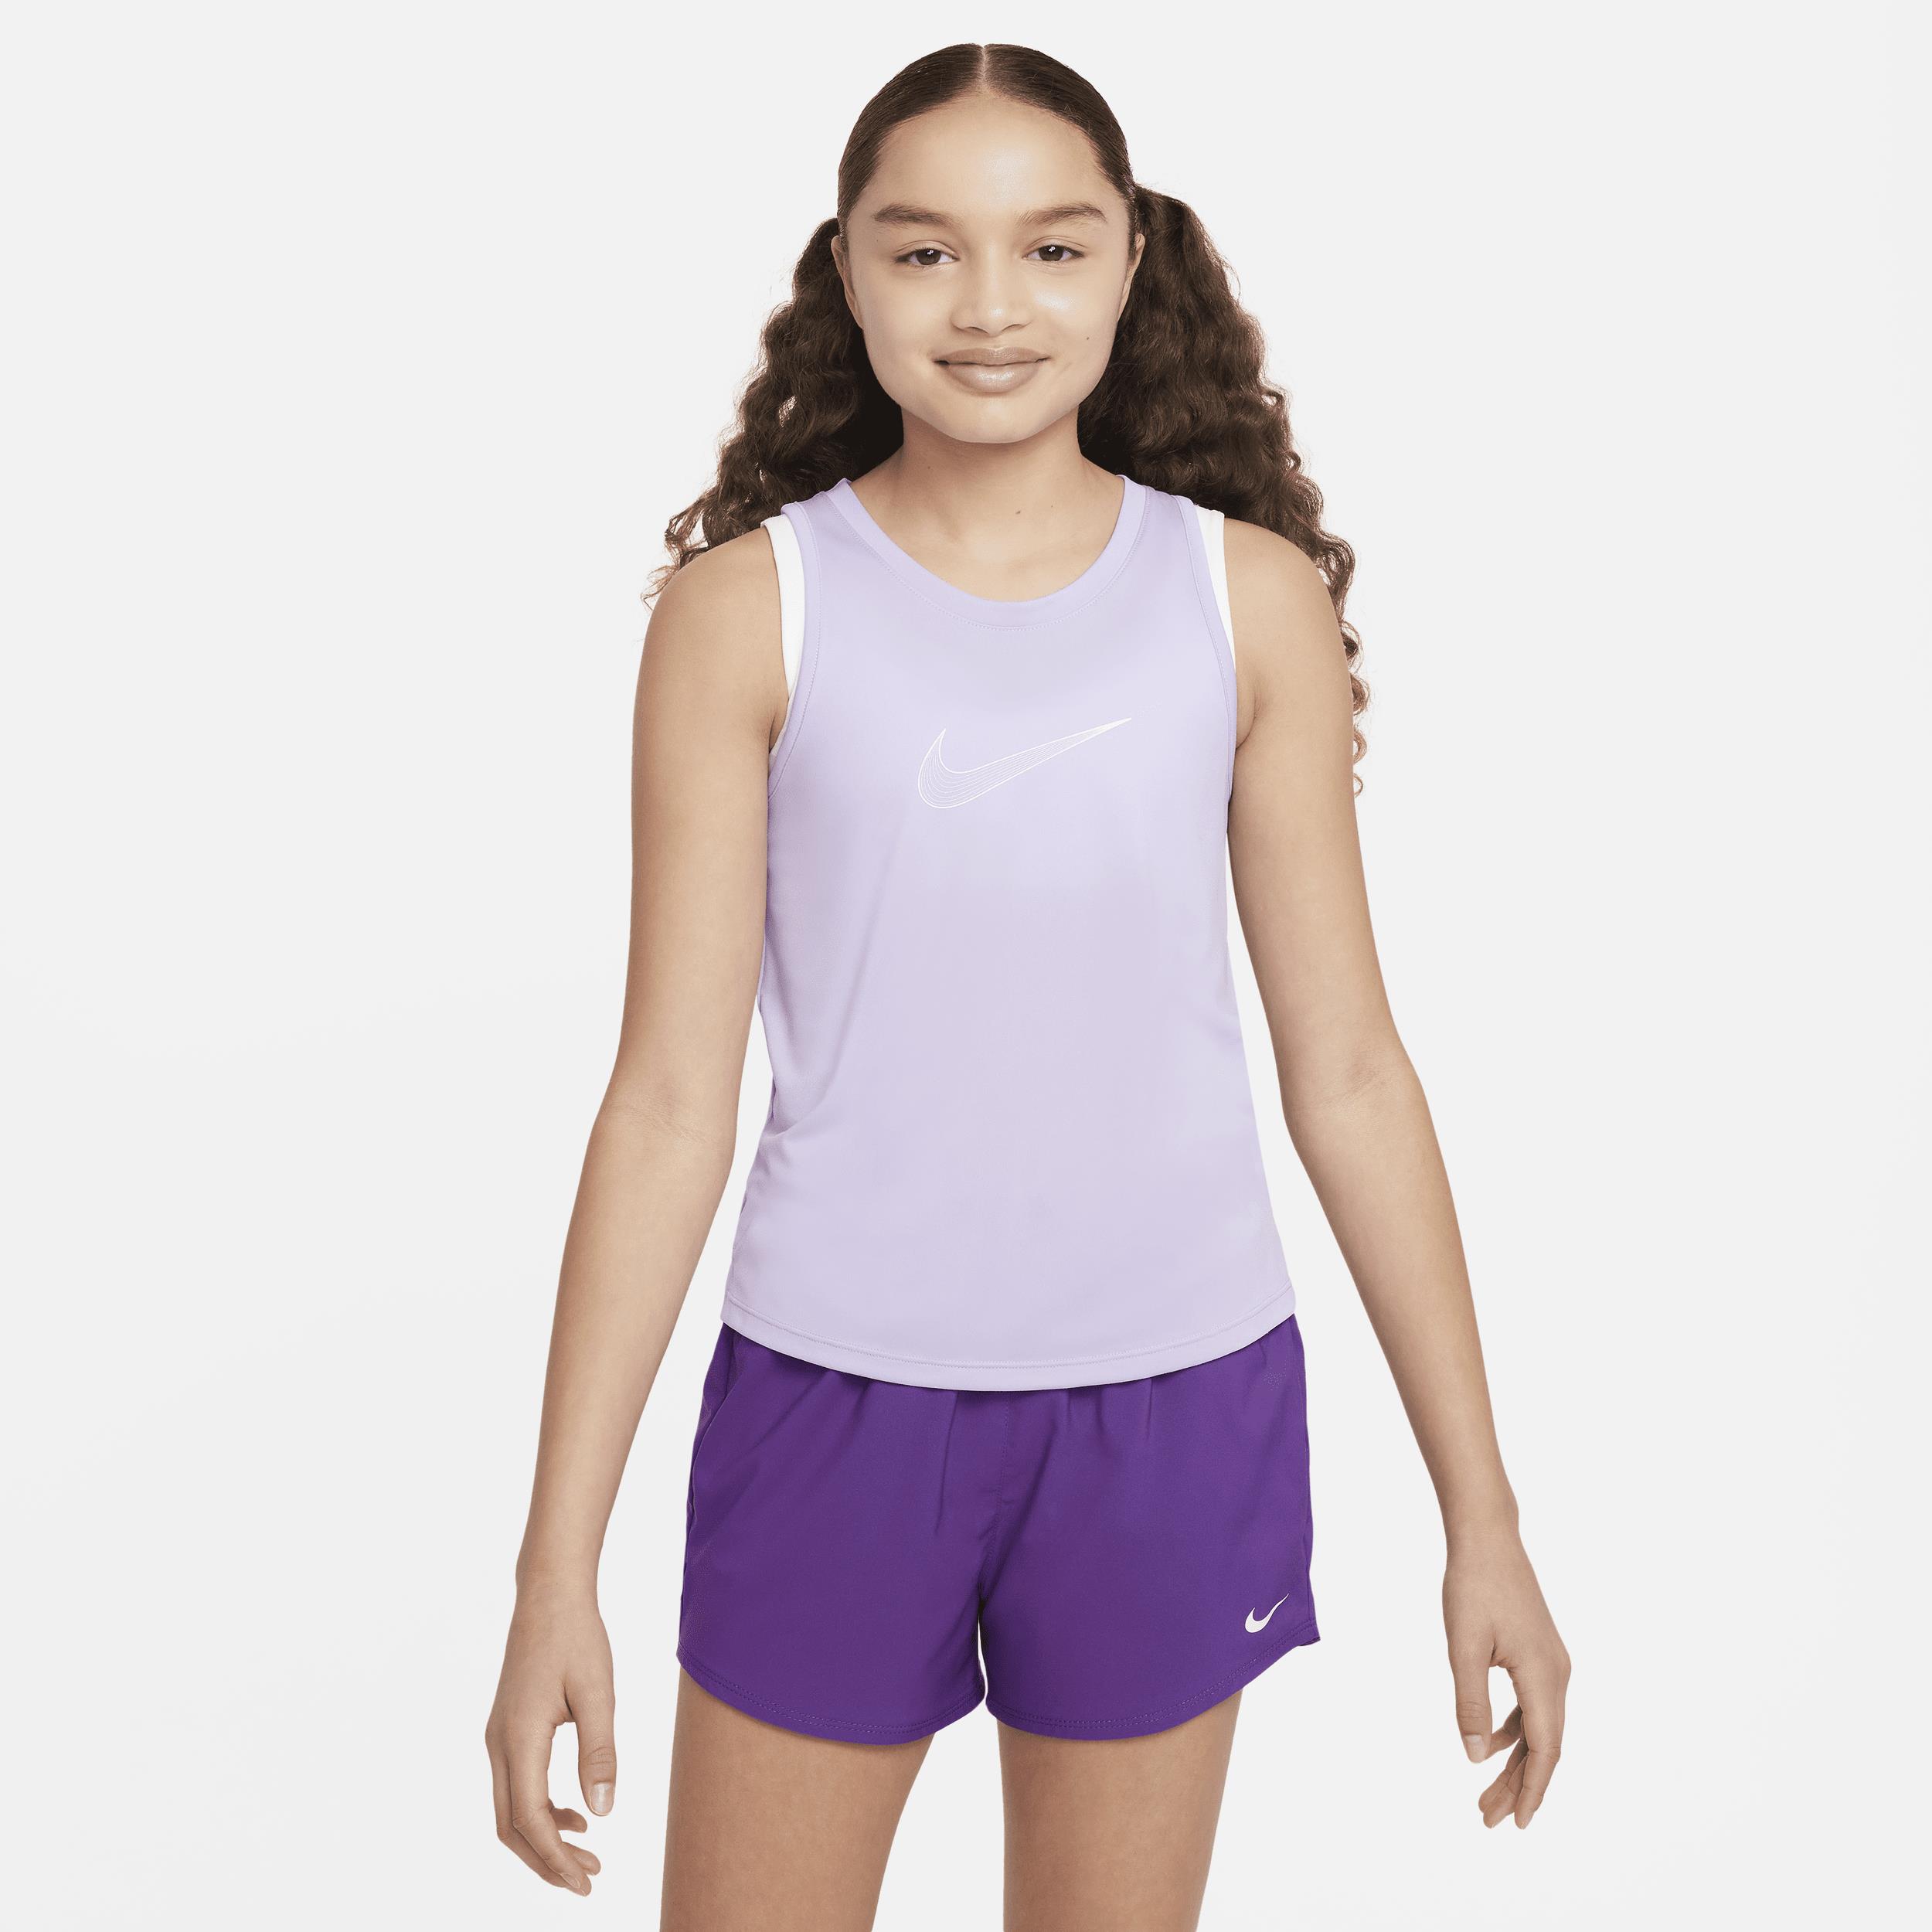 Nike One Older Kids' (Girls') Dri-FIT Training Tank Top - Purple - 50% Recycled Polyester